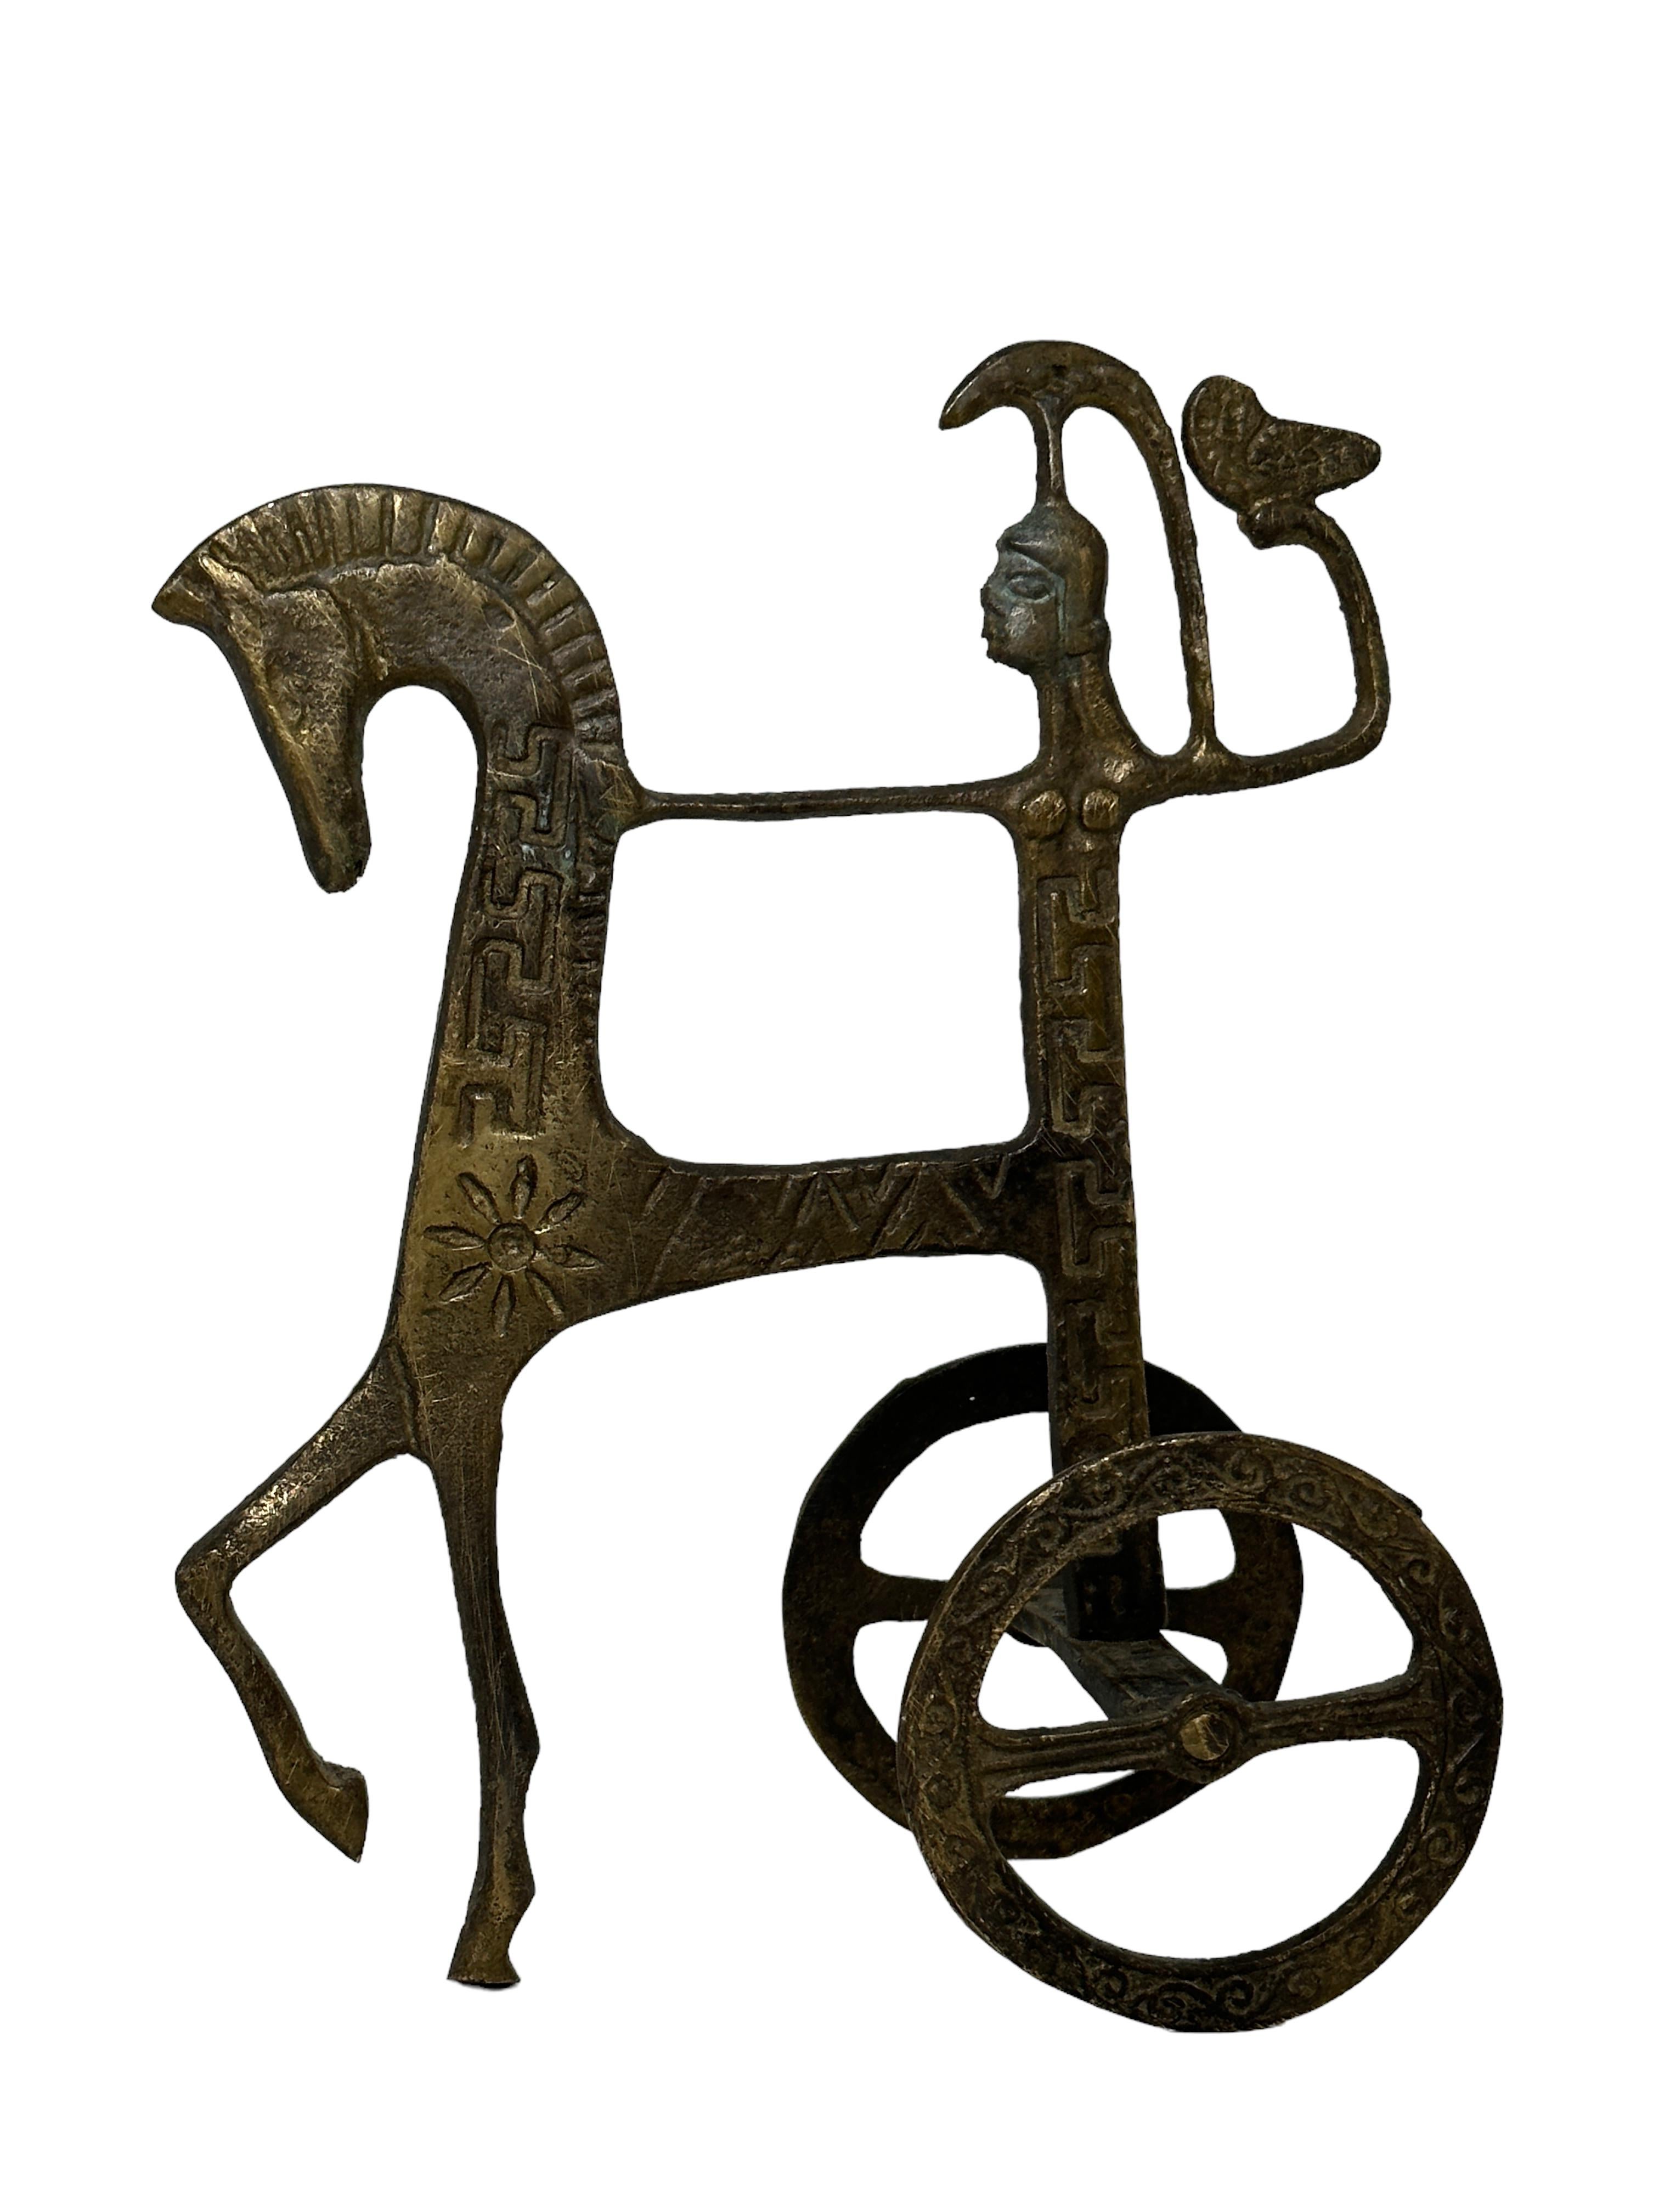 This is a bronze sculpture, which may have been done by Frederic Weinberg.
It is an incredibly stylized Roman Chariot and has a patina finish. Italian-made and great for any Mid-Century Modern interior.
It looks like the work of Frederic Weinberg